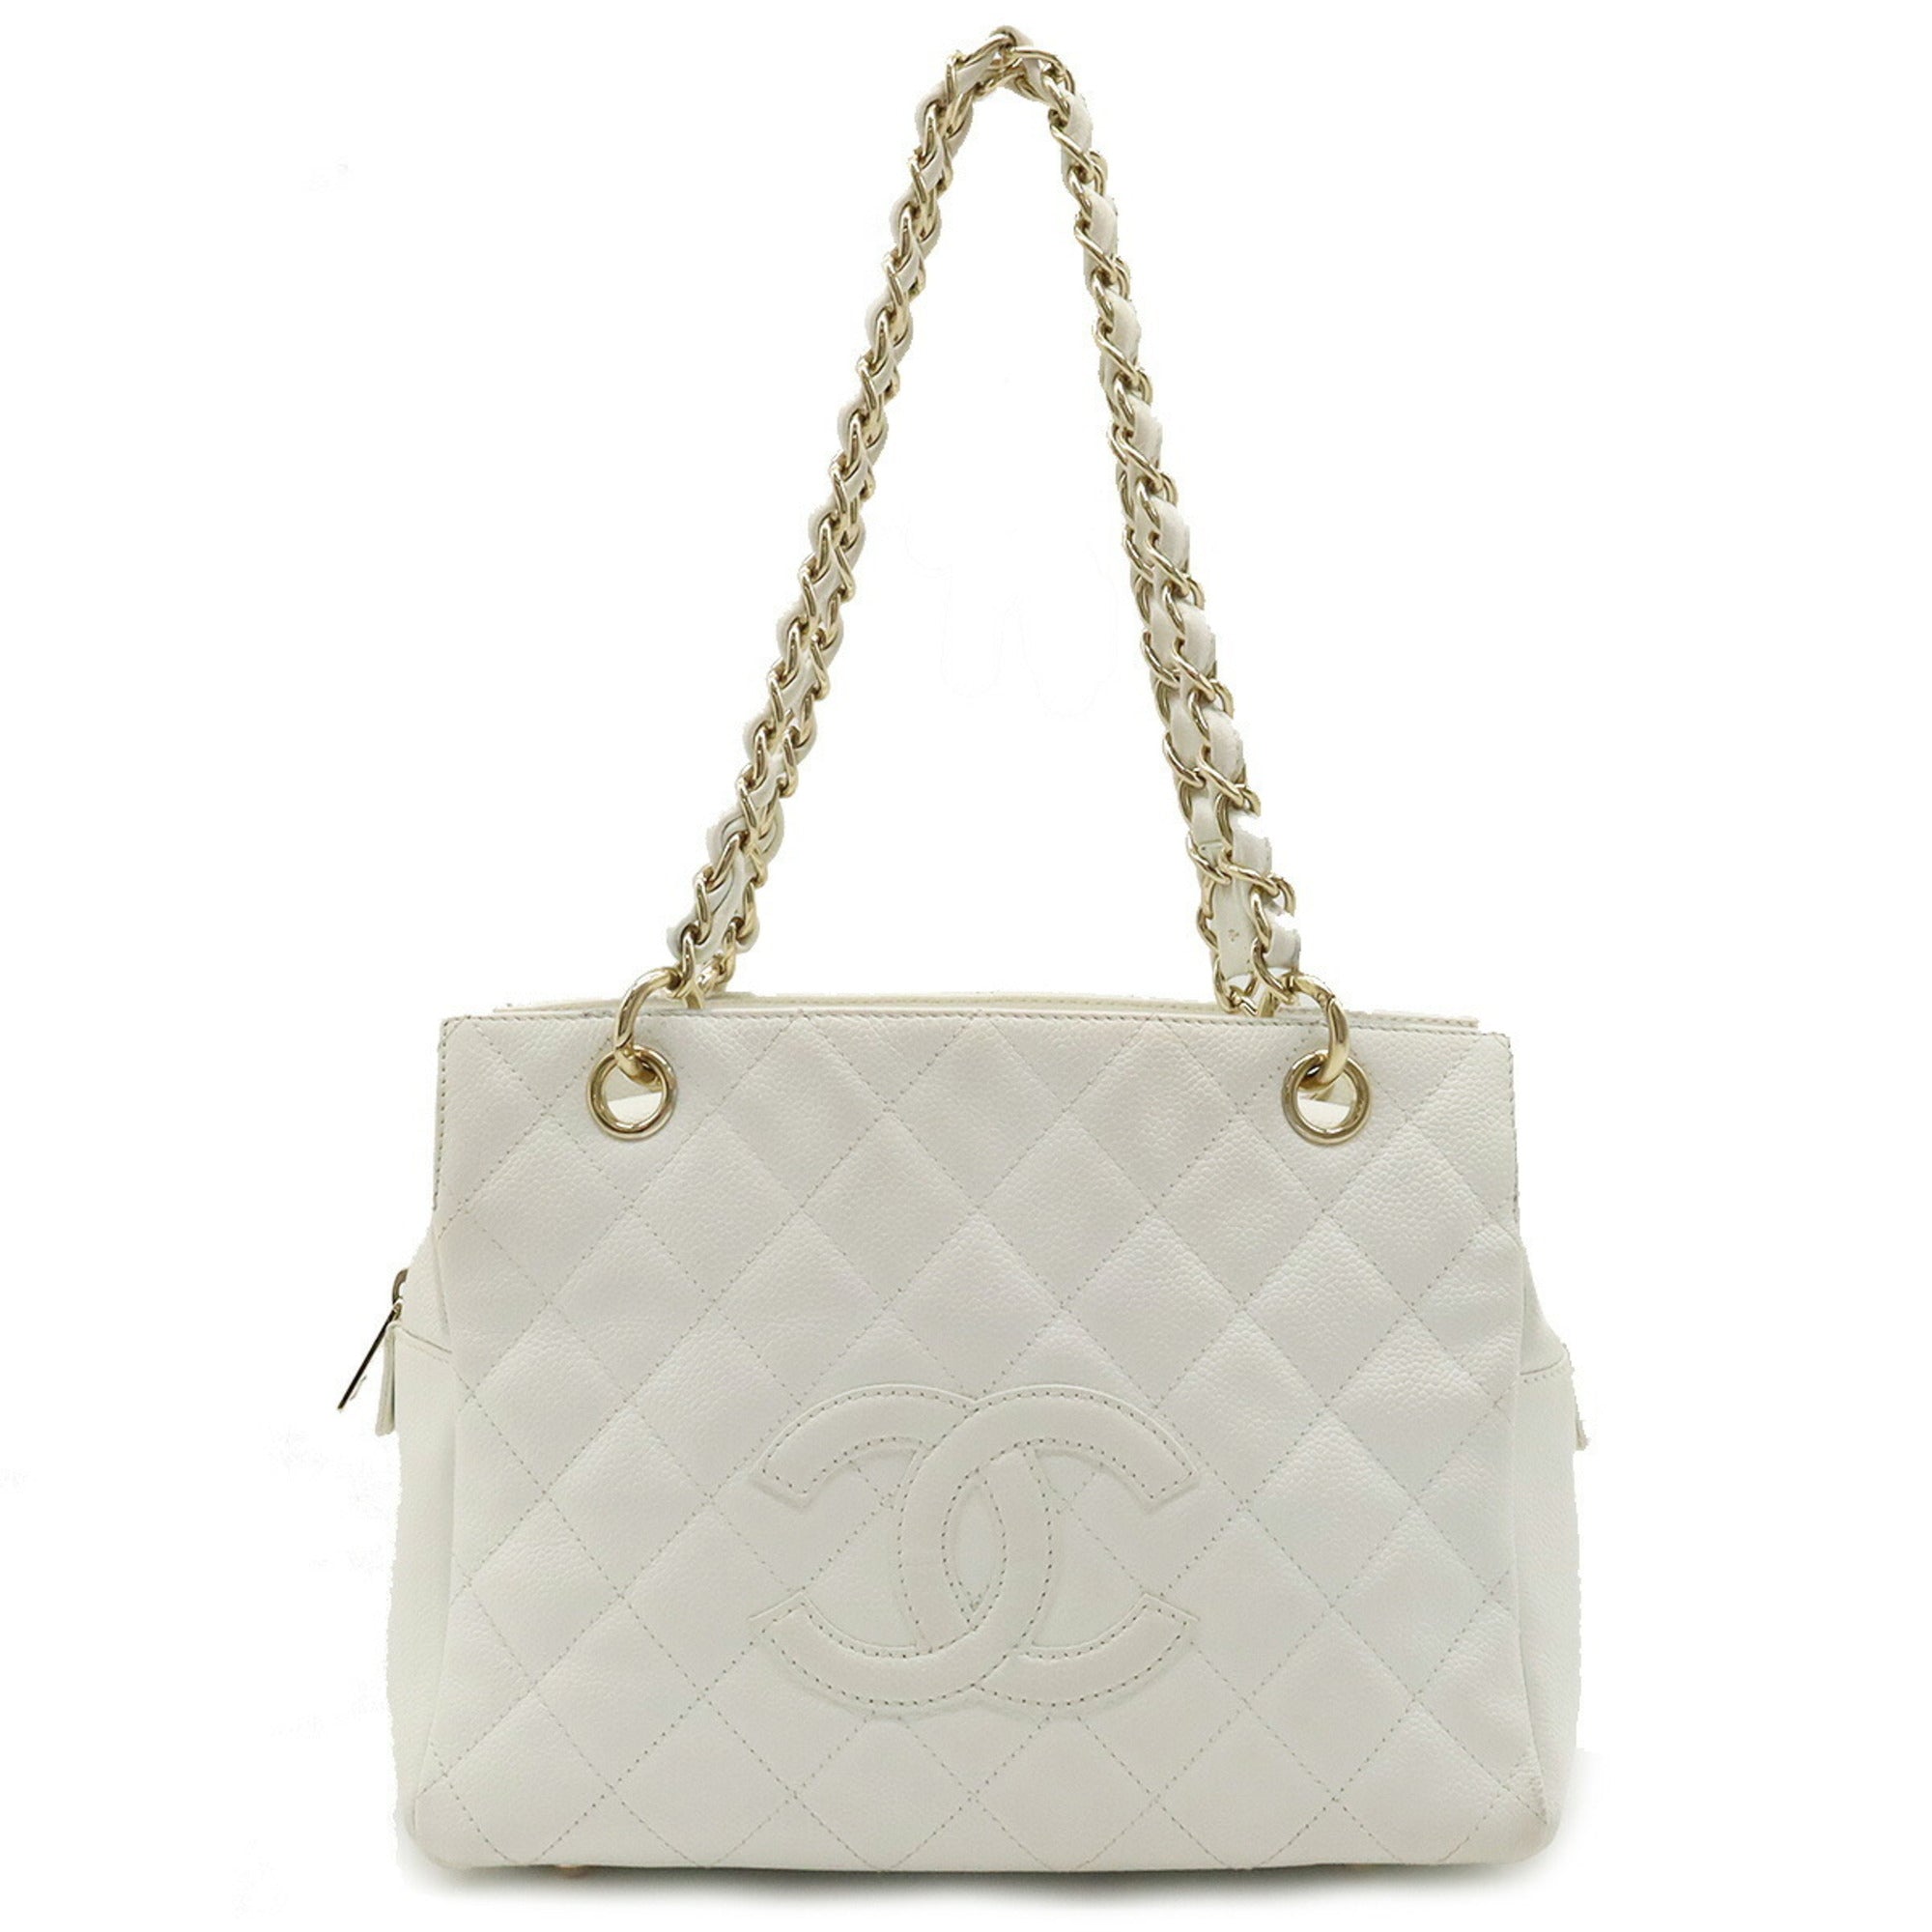 Chanel Cc Modern Chain Tote 221925 White Leather Shoulder Bag